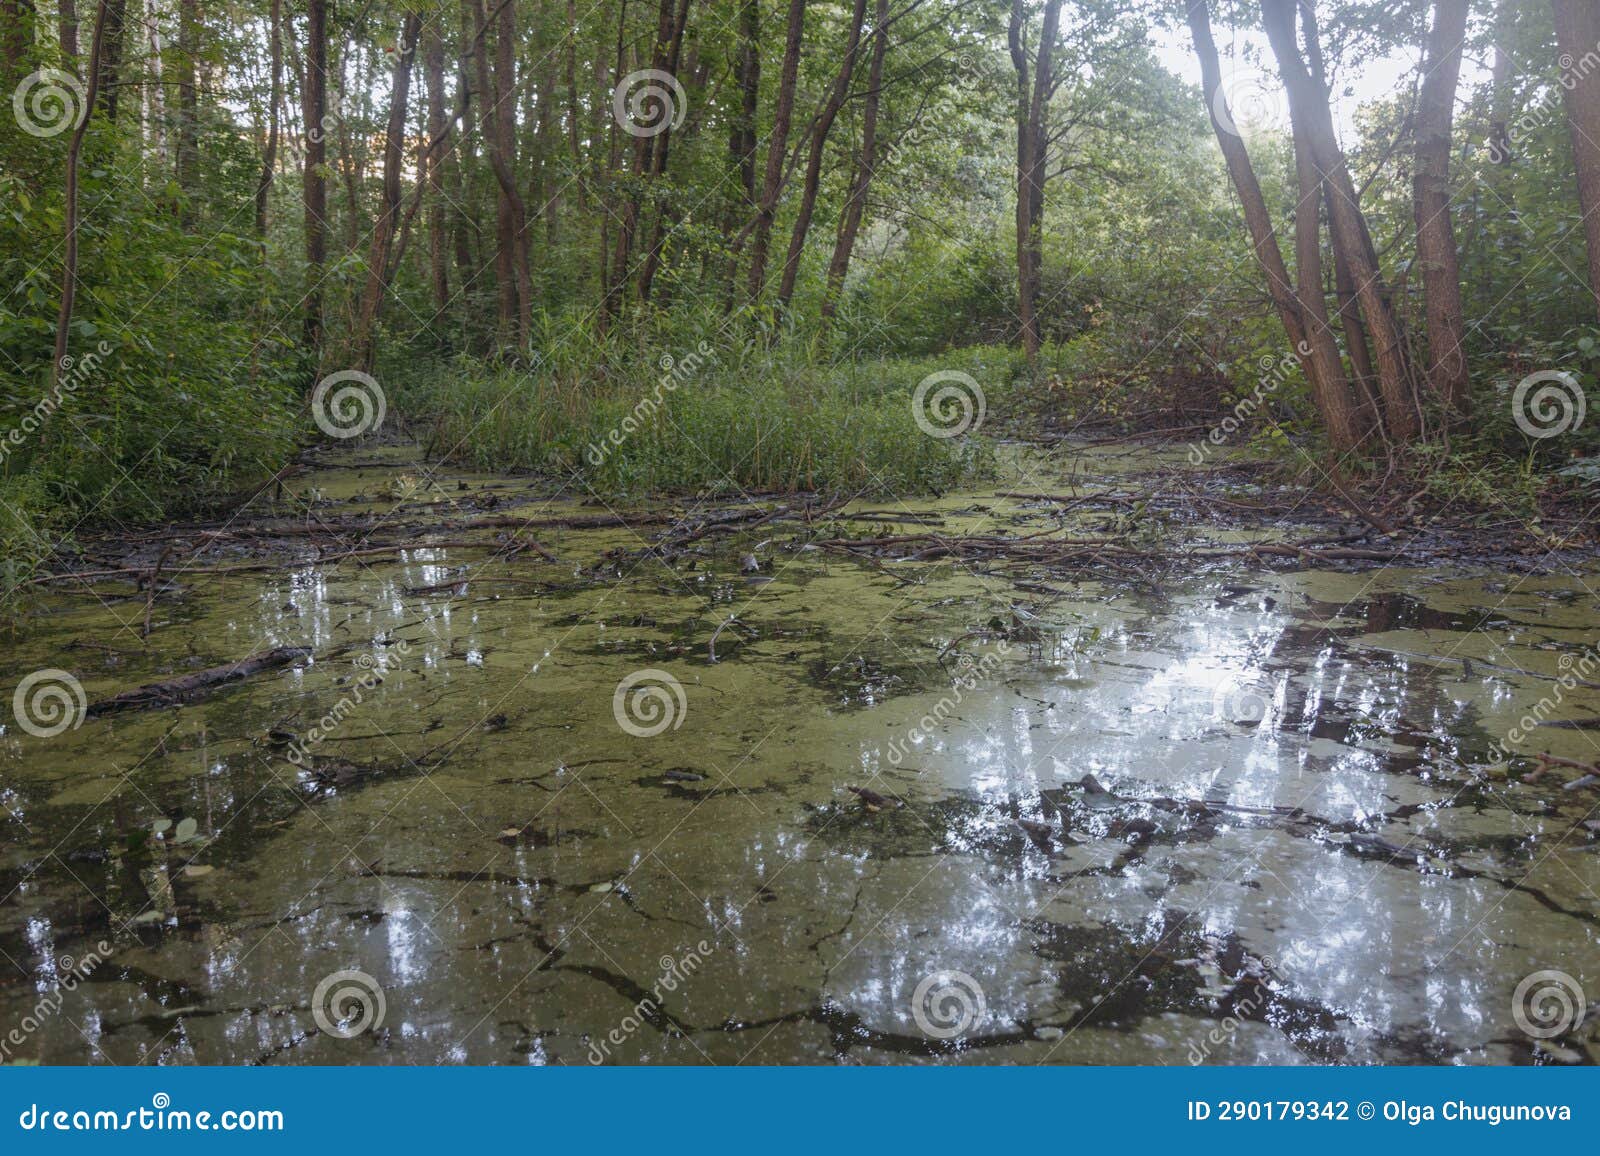 swamp with quagmire in the forest, in the morning. forest swamp. a quagmire in a forest swamp